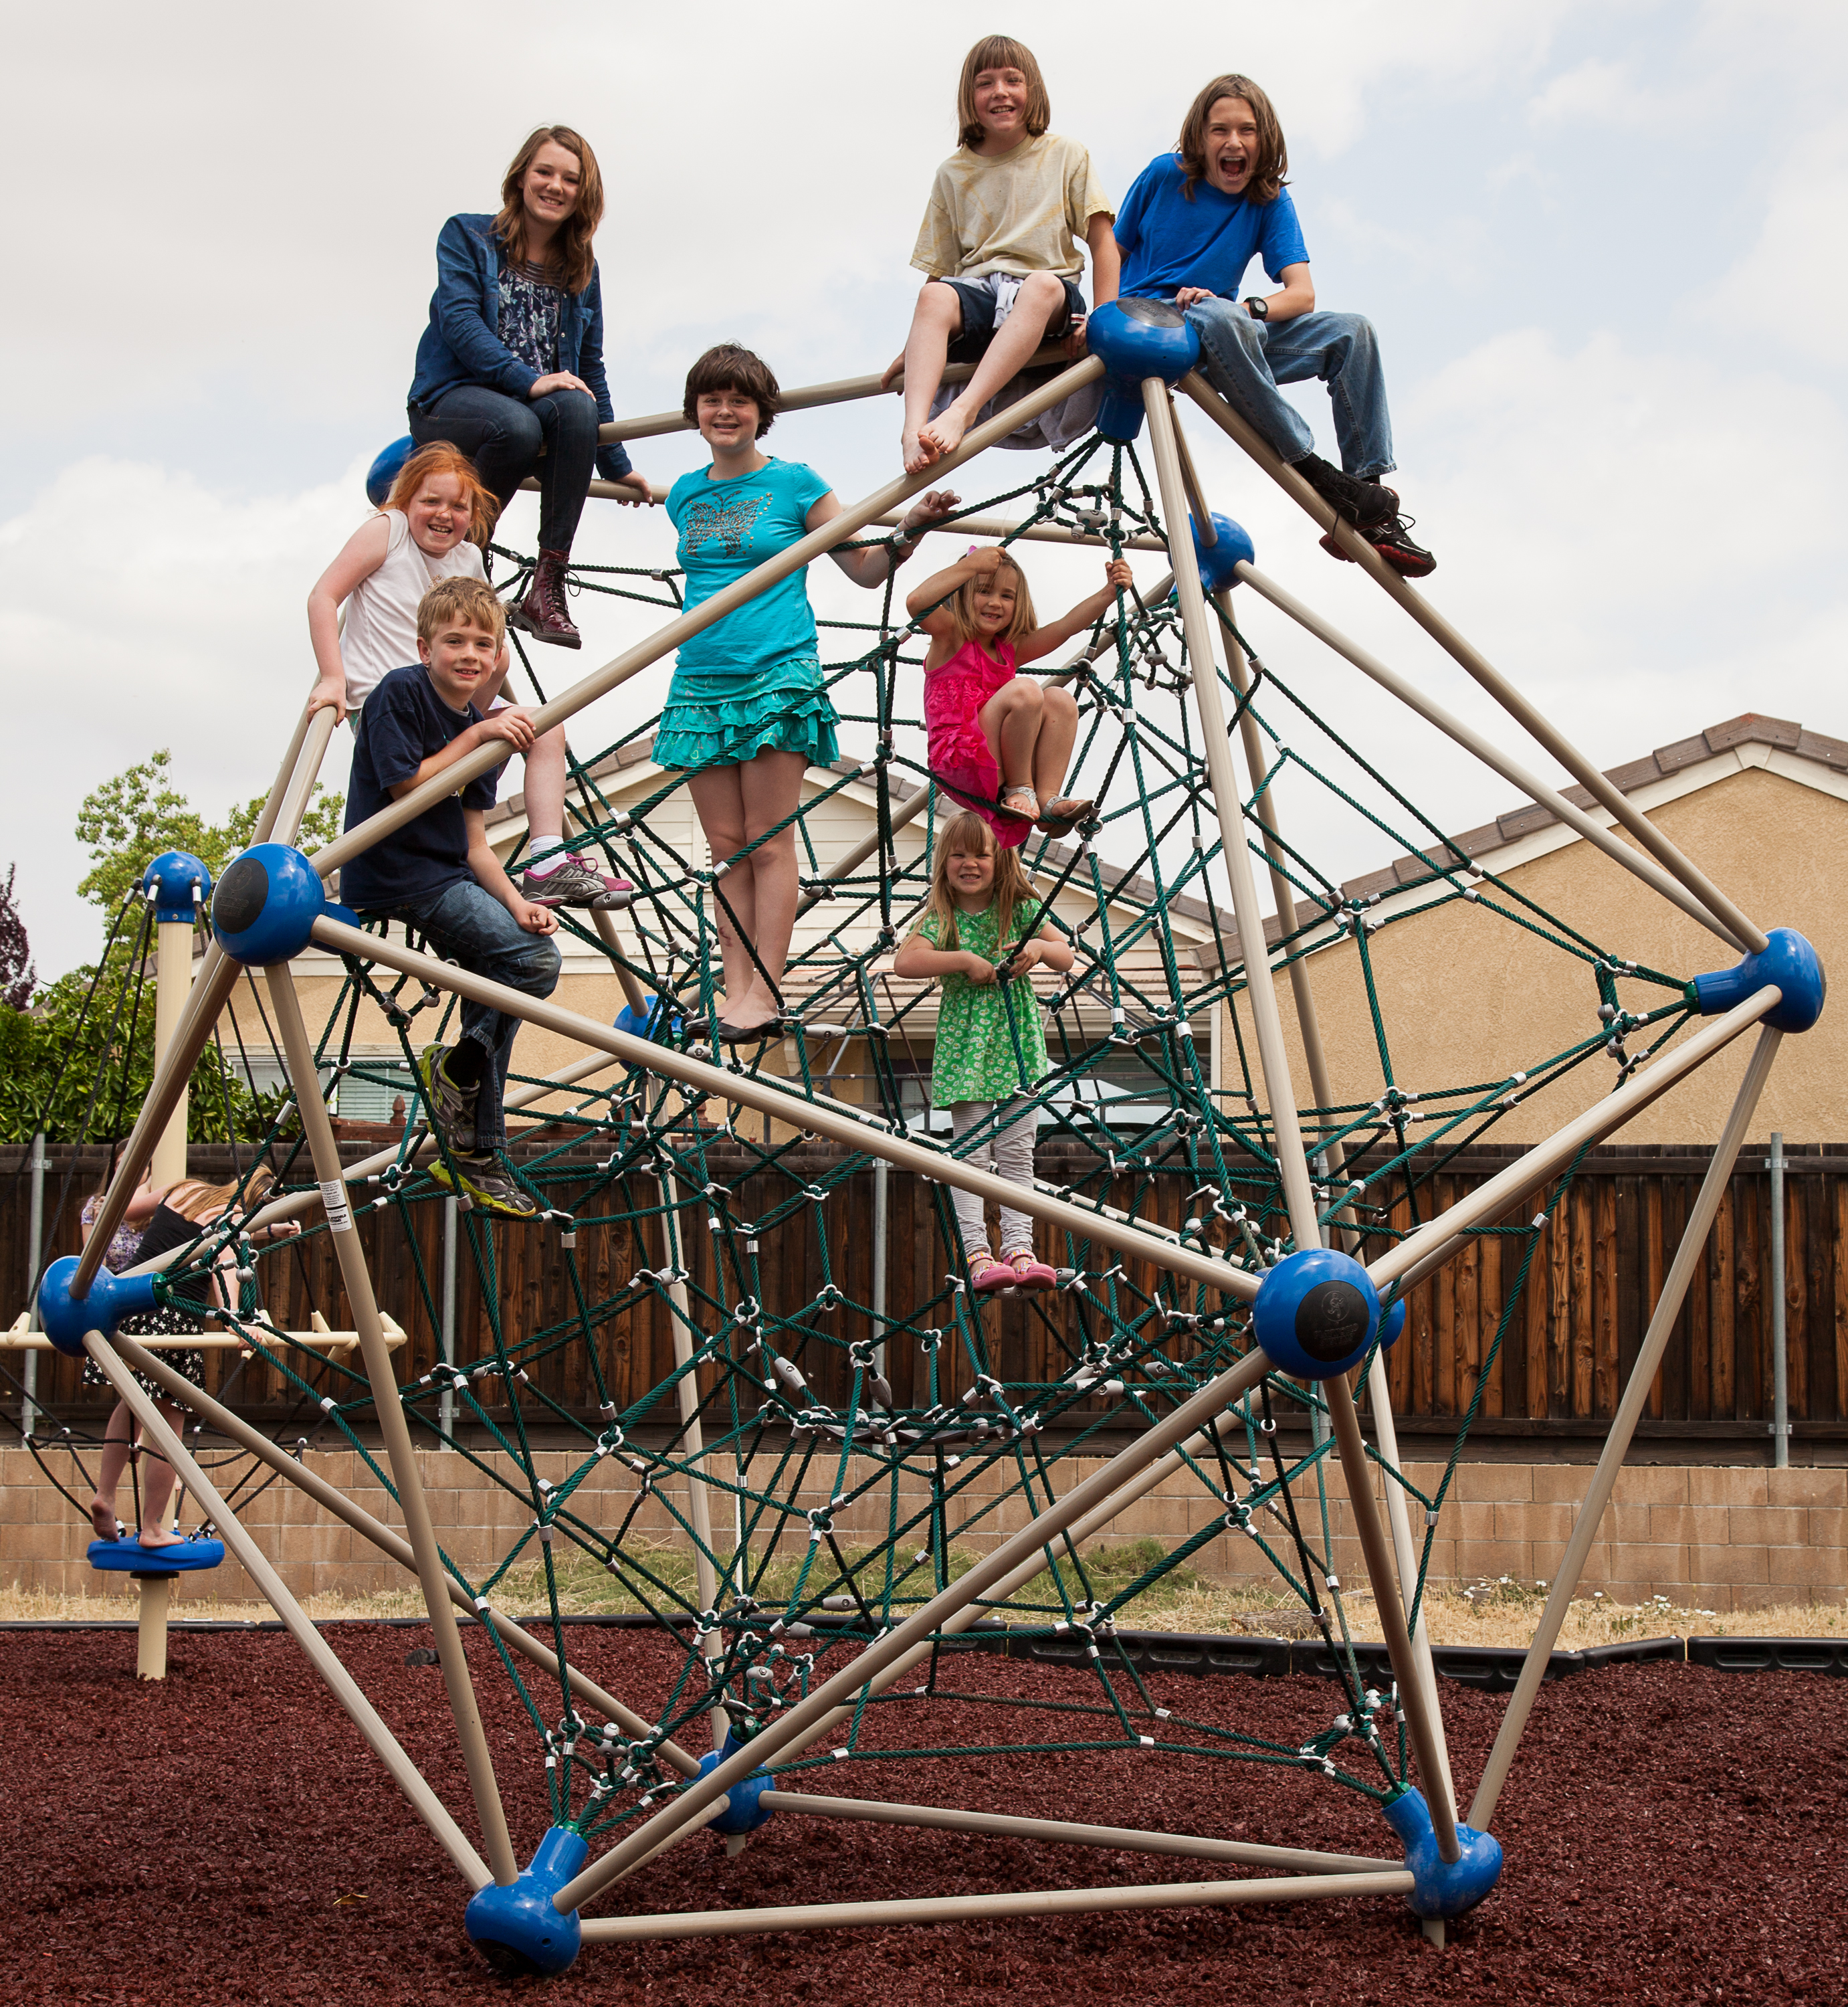 A group of children sit on a climbing structure on a playground.